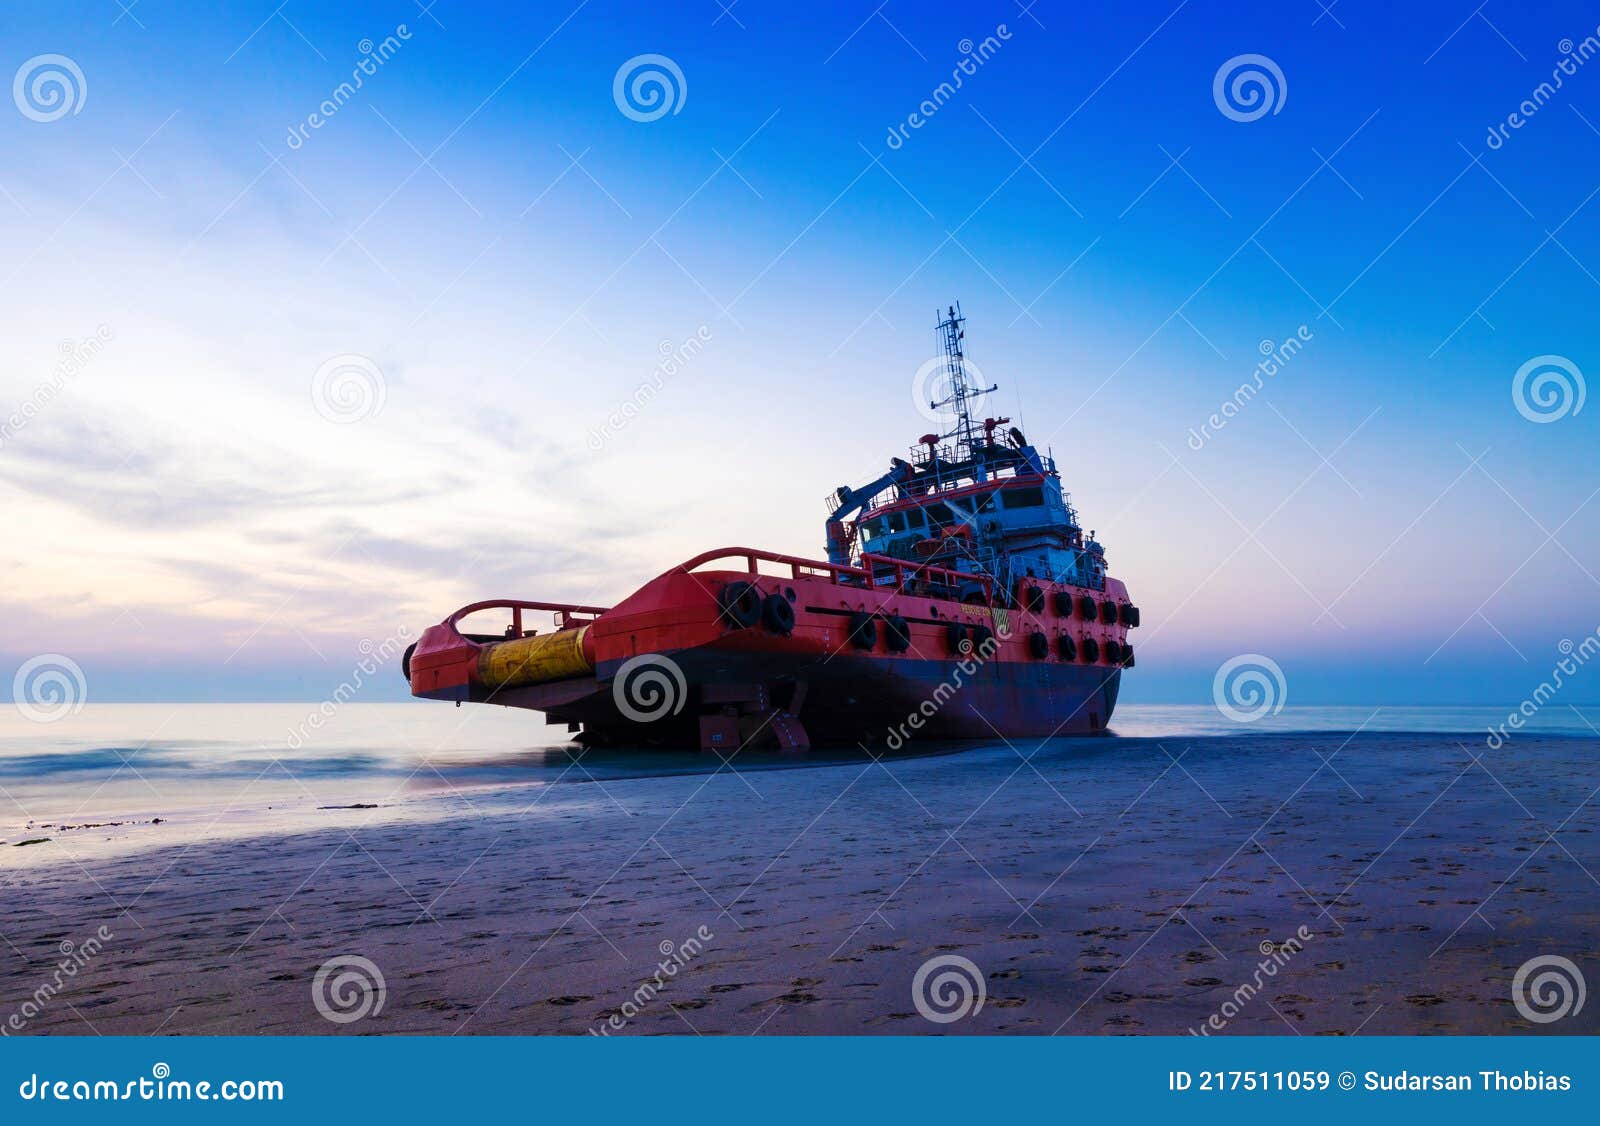 ship wreck along the umm al quwain coast in uae. a stranded or abandoned vessel on the beach.